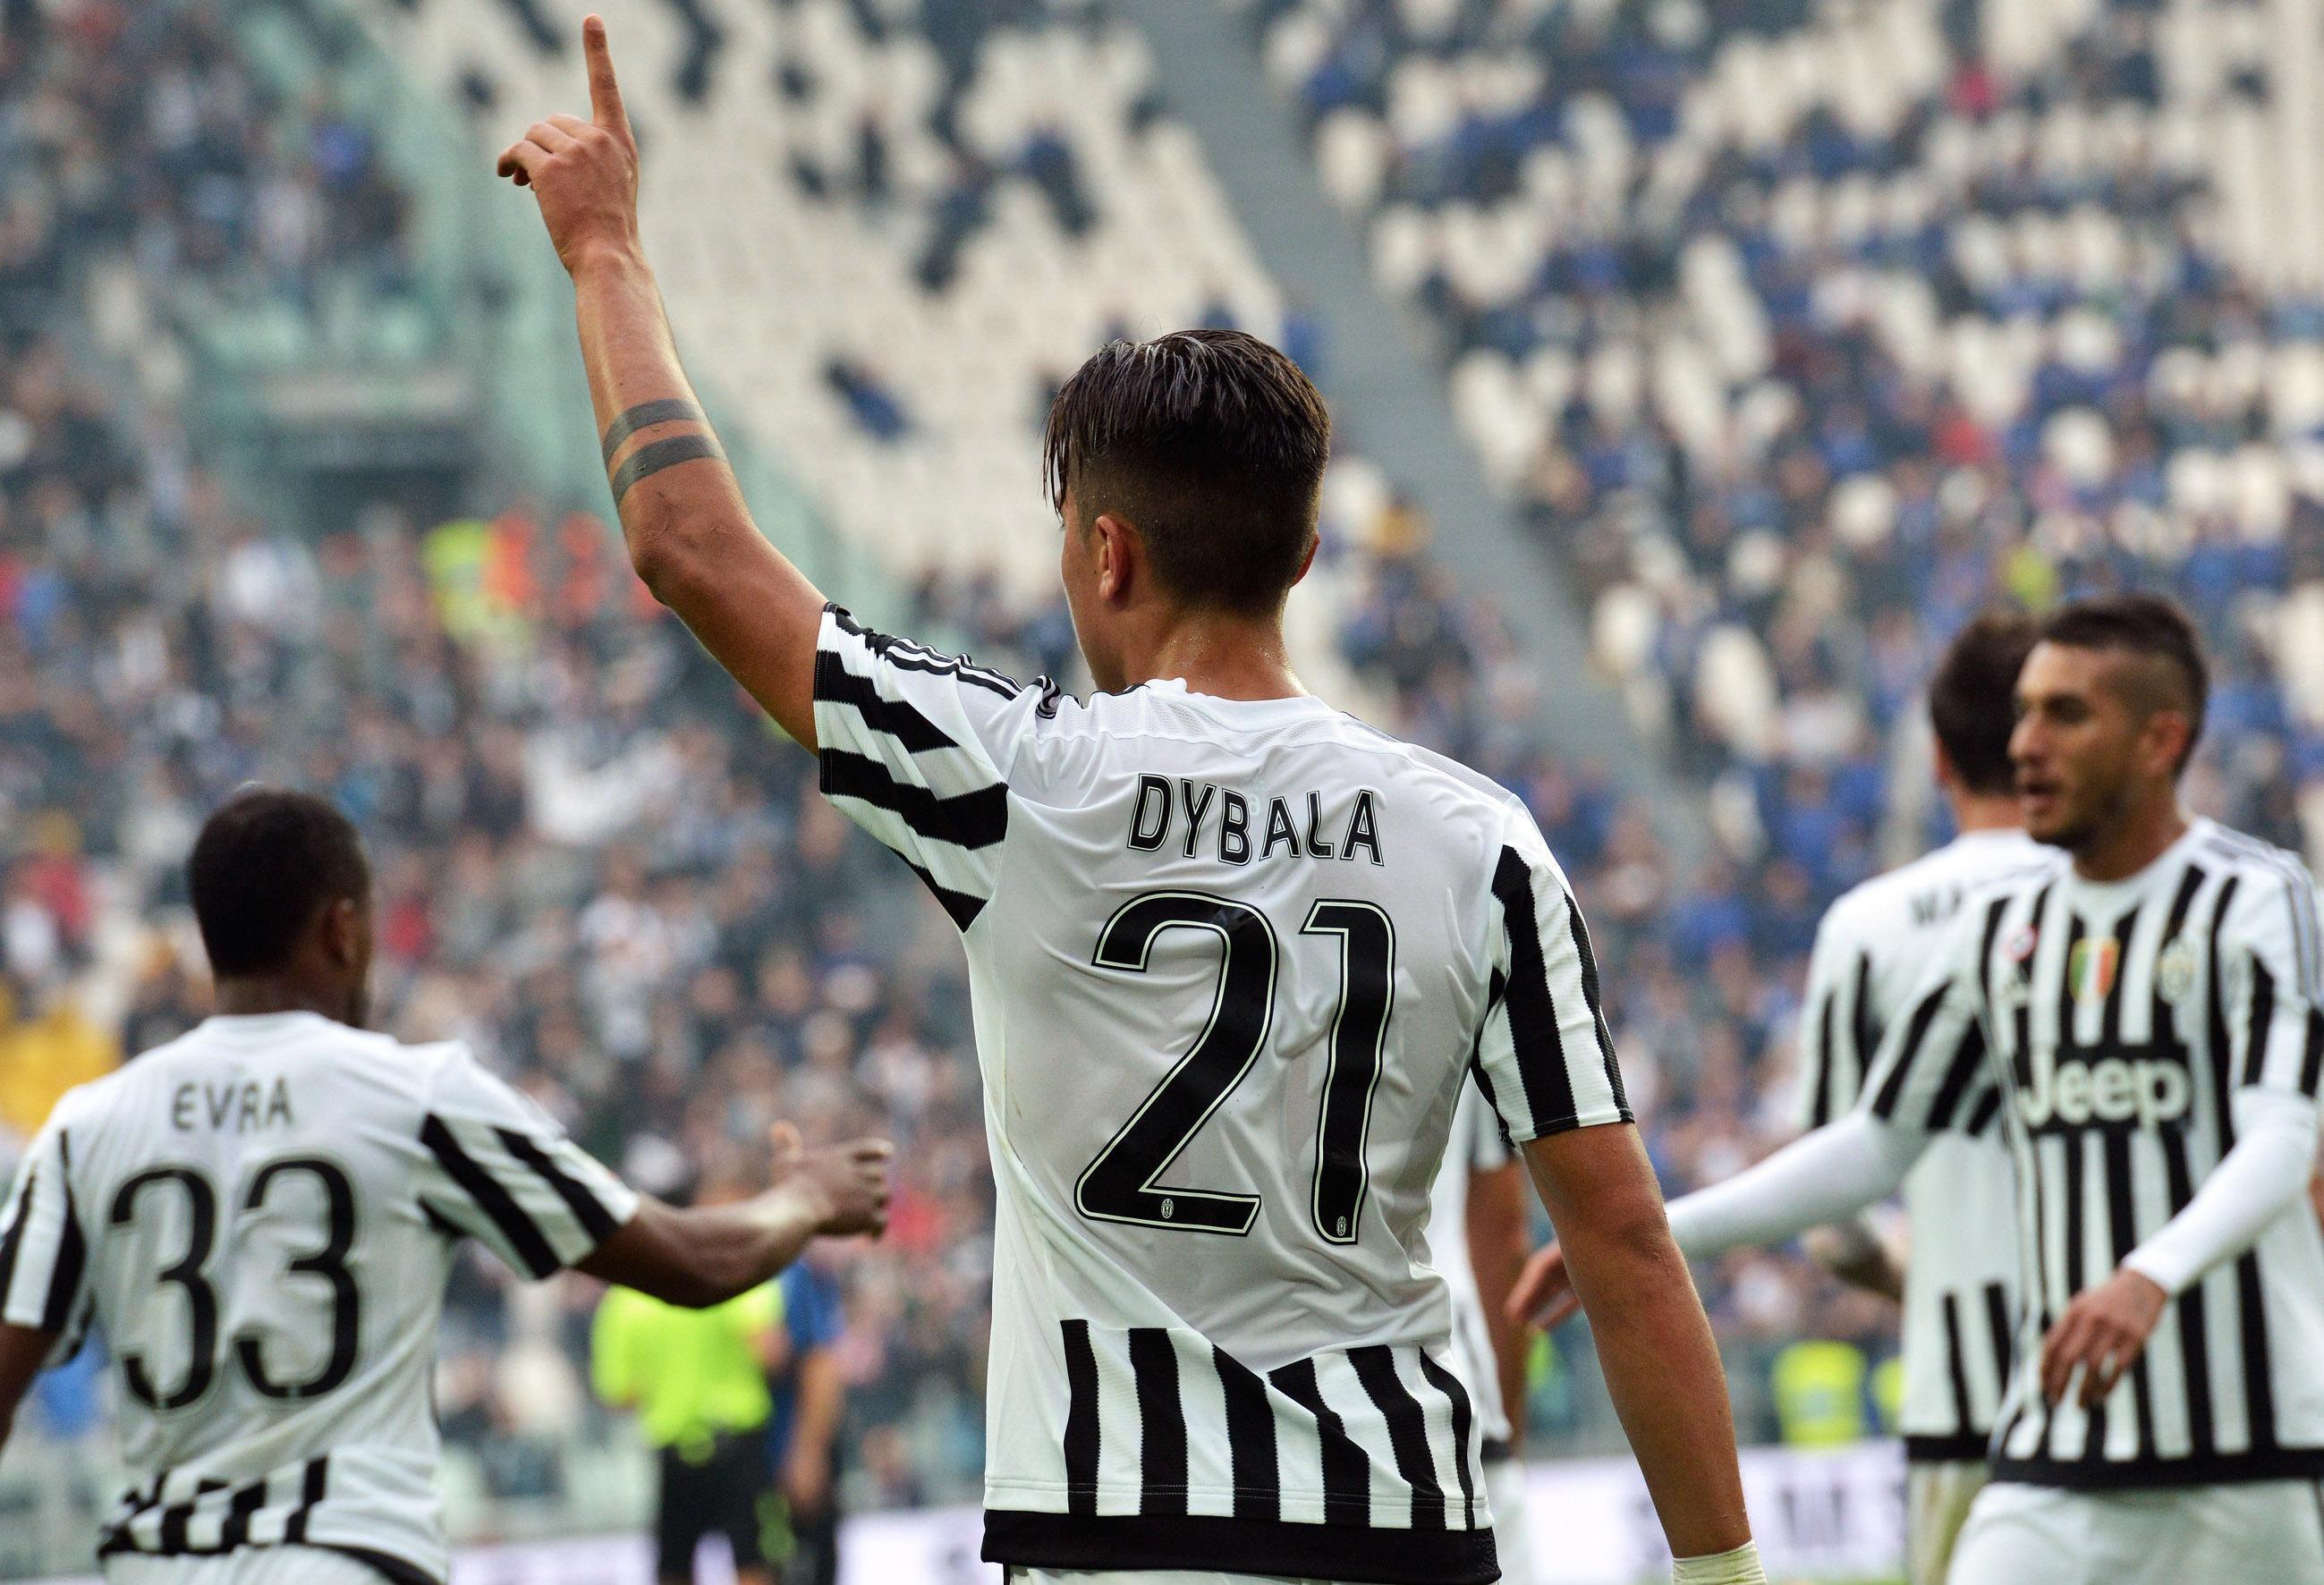 Argentinian forward of Juventus Paulo Dybala (C) celebrates after scoring the 1-0 goal lead during Italian Serie A soccer match between Juventus and Atalanta at the Juventus stadium in Turin, 25 October 2015. ANSA / ANDREA DI MARCO